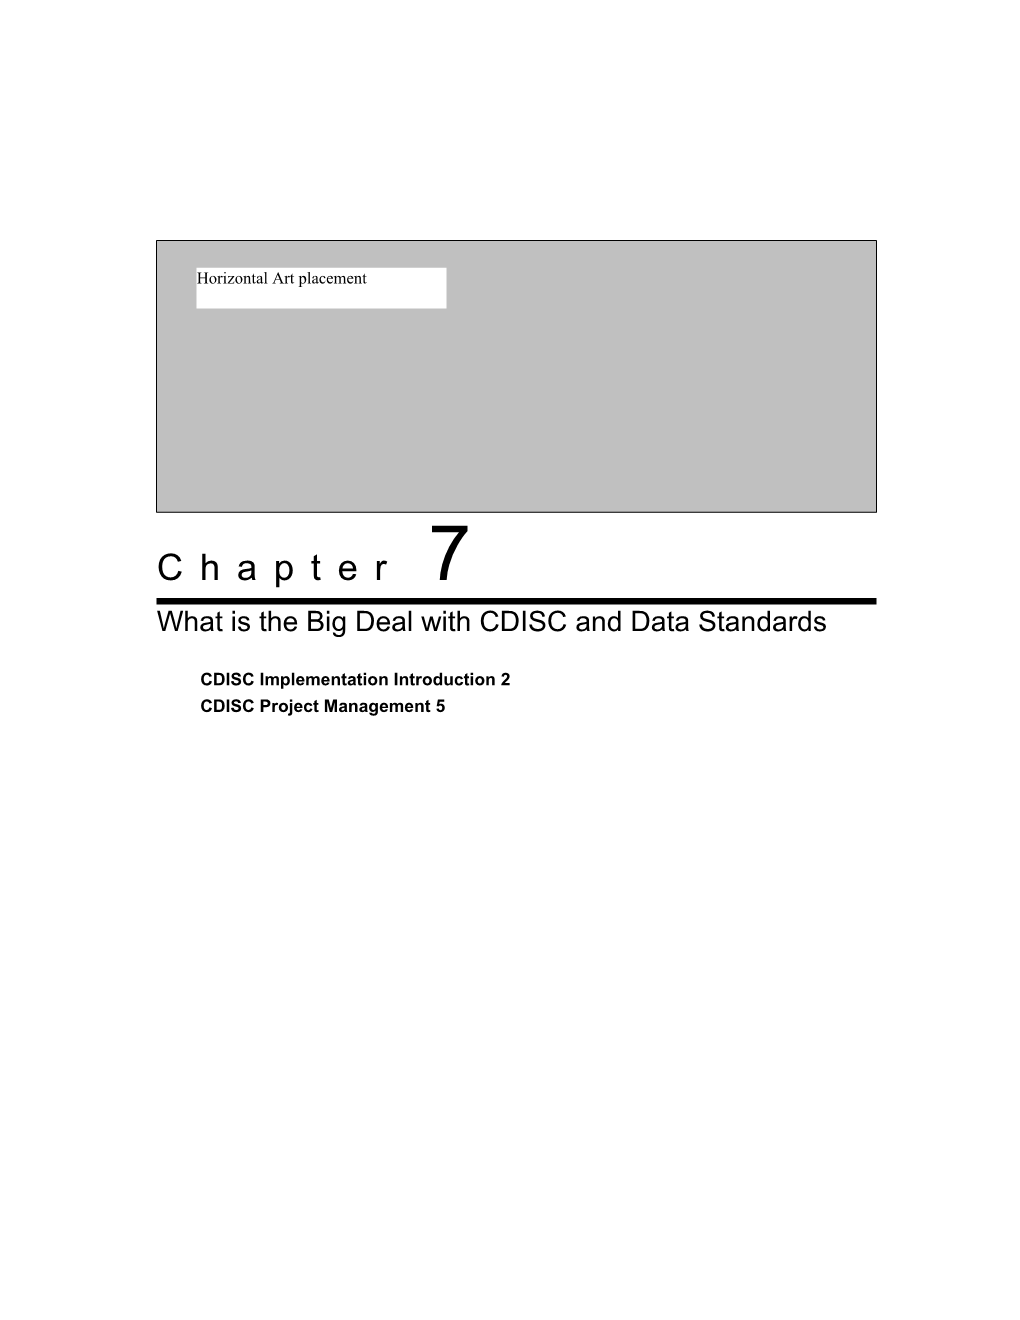 Chapter 7 What Is the Big Deal with CDISC and Data Standards 37